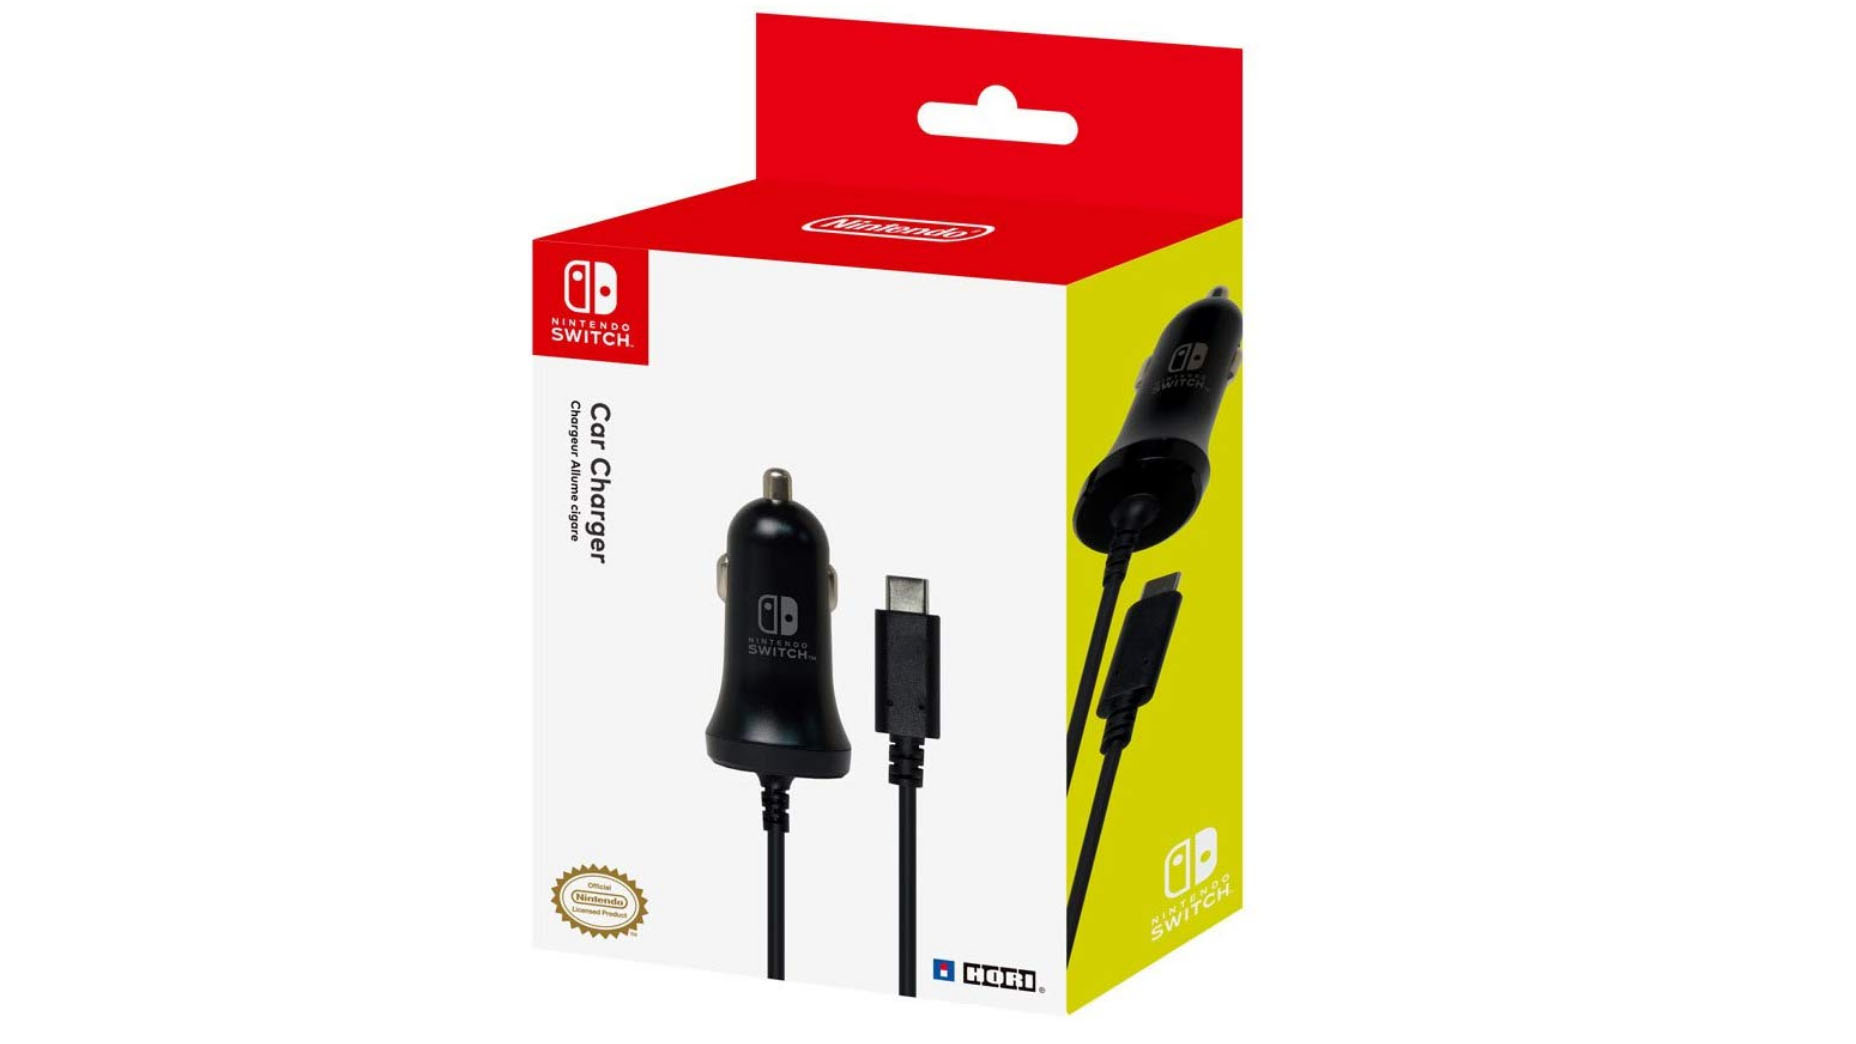 Outside of box view of Hori Switch Lite car charger.